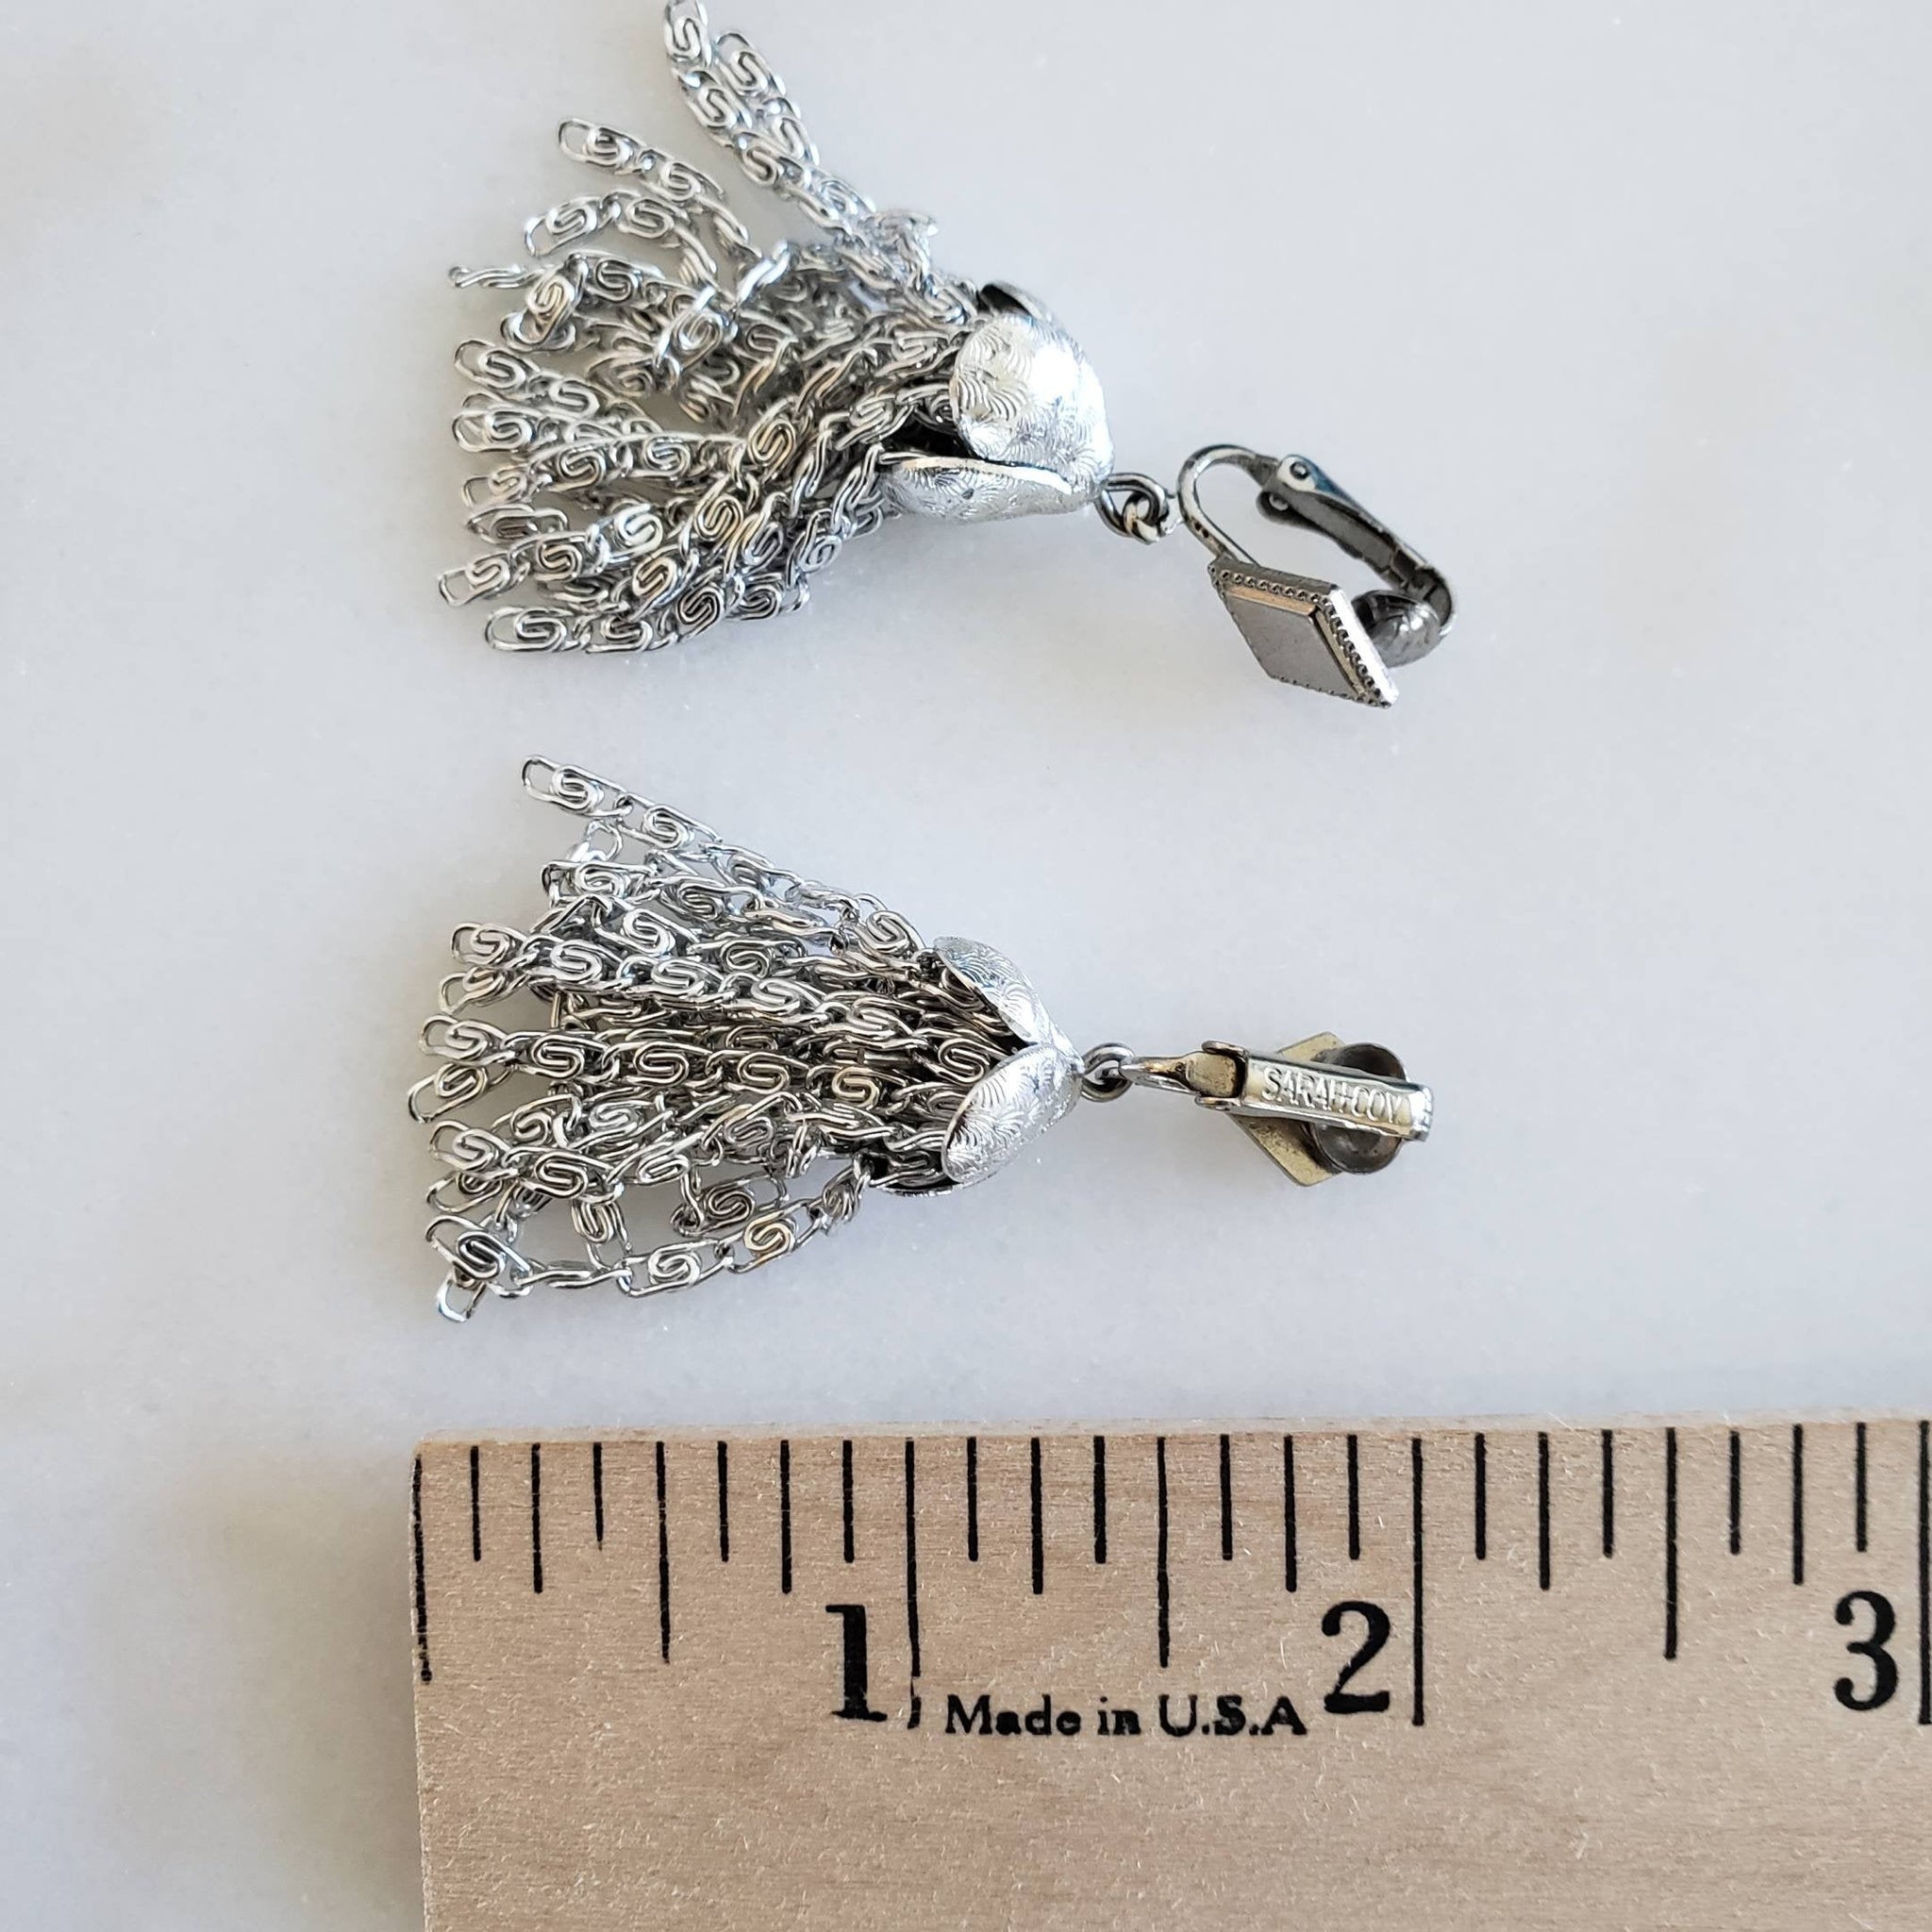 Vintage Sarah Coventry Silver Tone Clip-On Tassel Earrings - ChicCityVintage